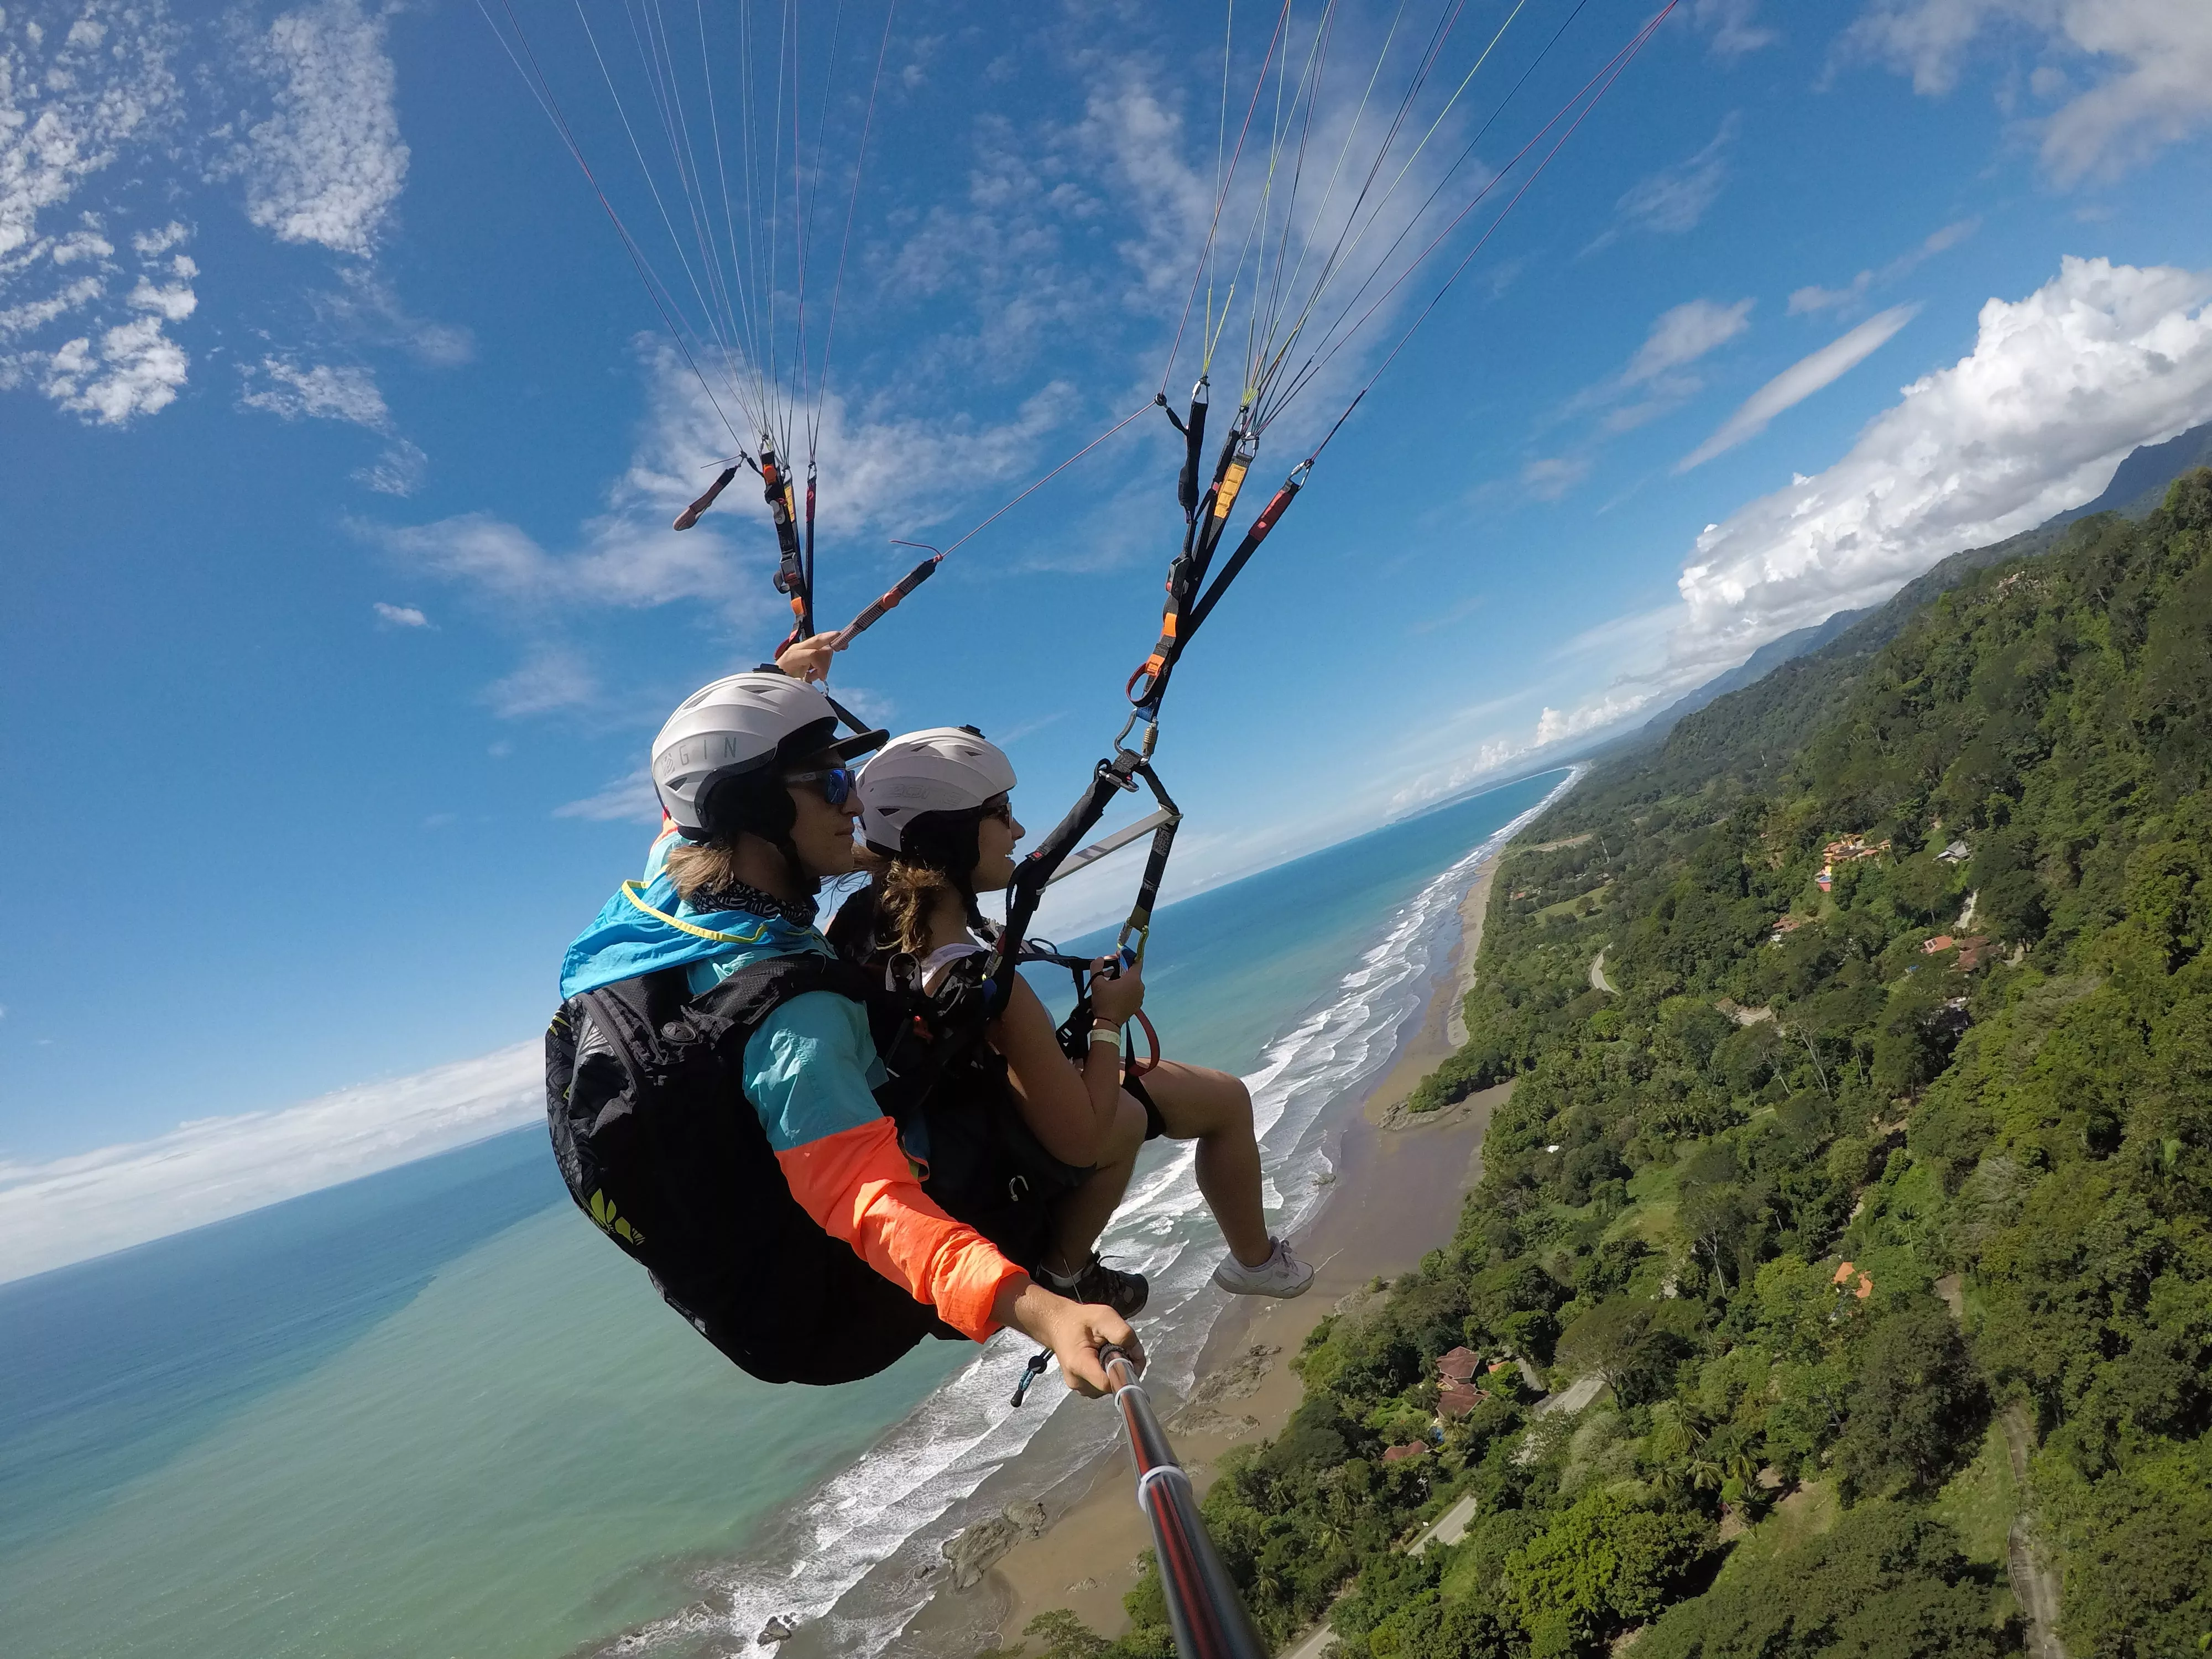 Zion Paragliding in Costa Rica, North America | Paragliding - Rated 1.4